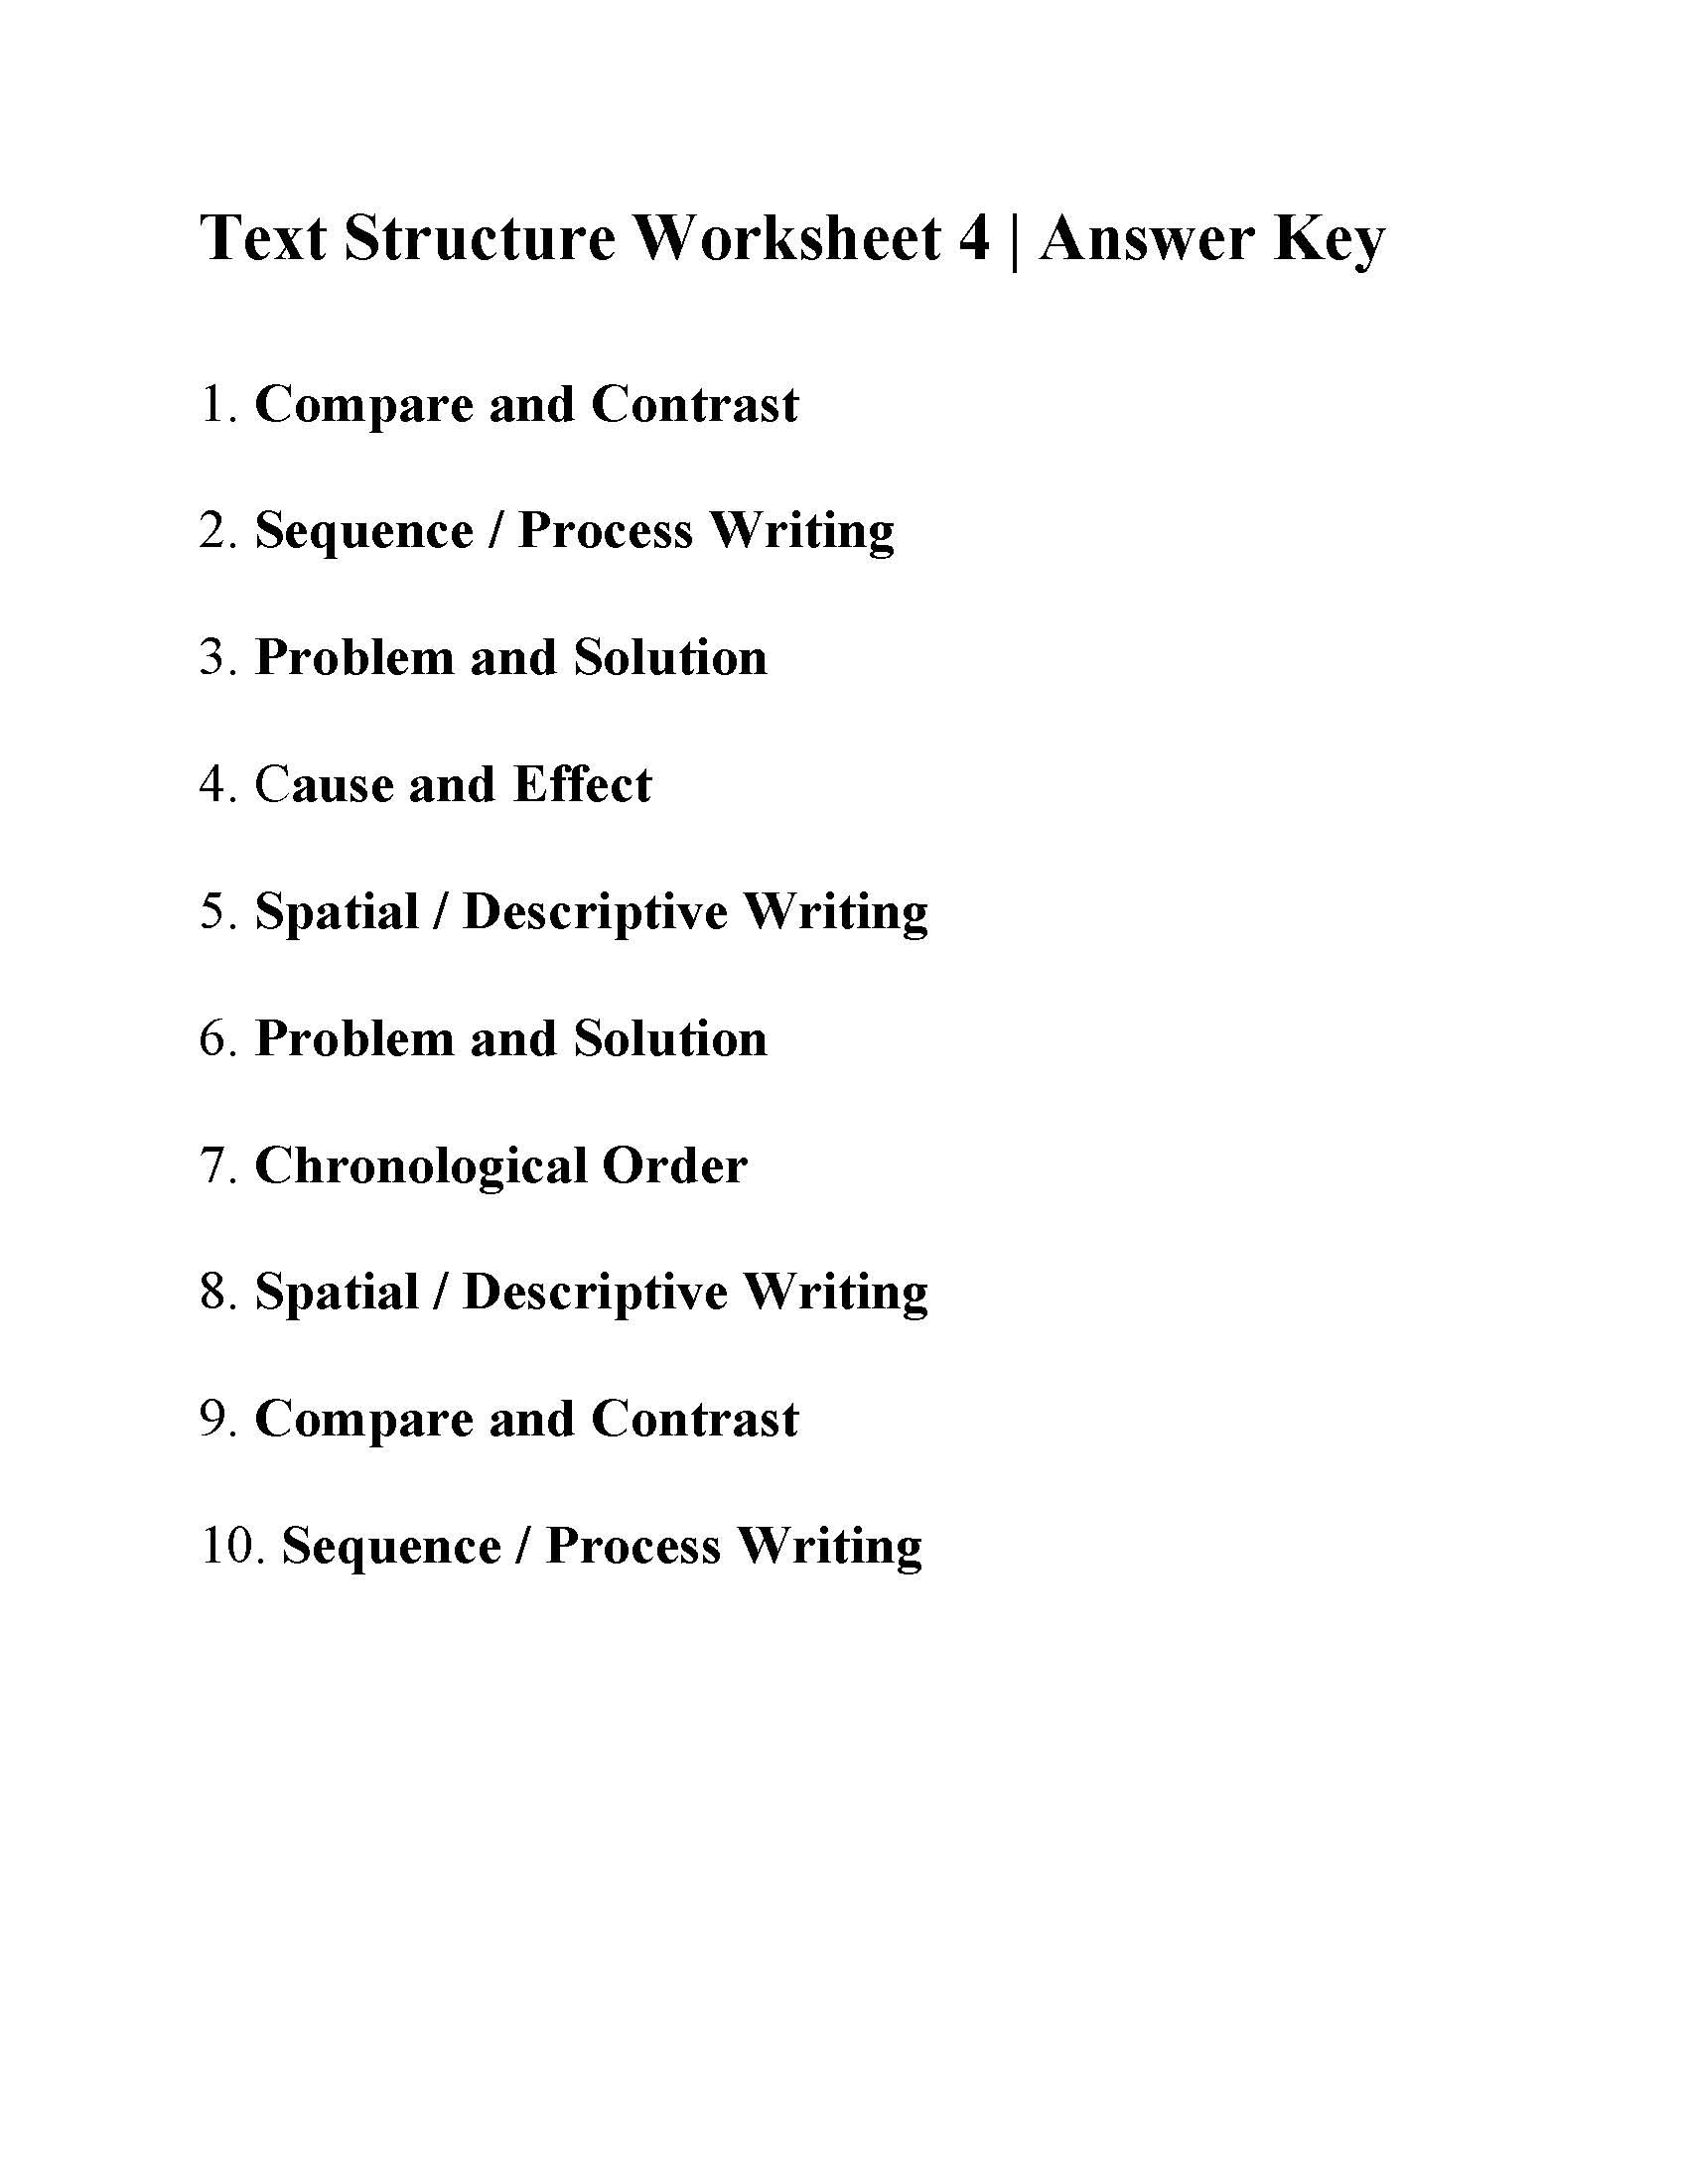 Text Structure Worksheet 4th Grade Text Structure Worksheet 4